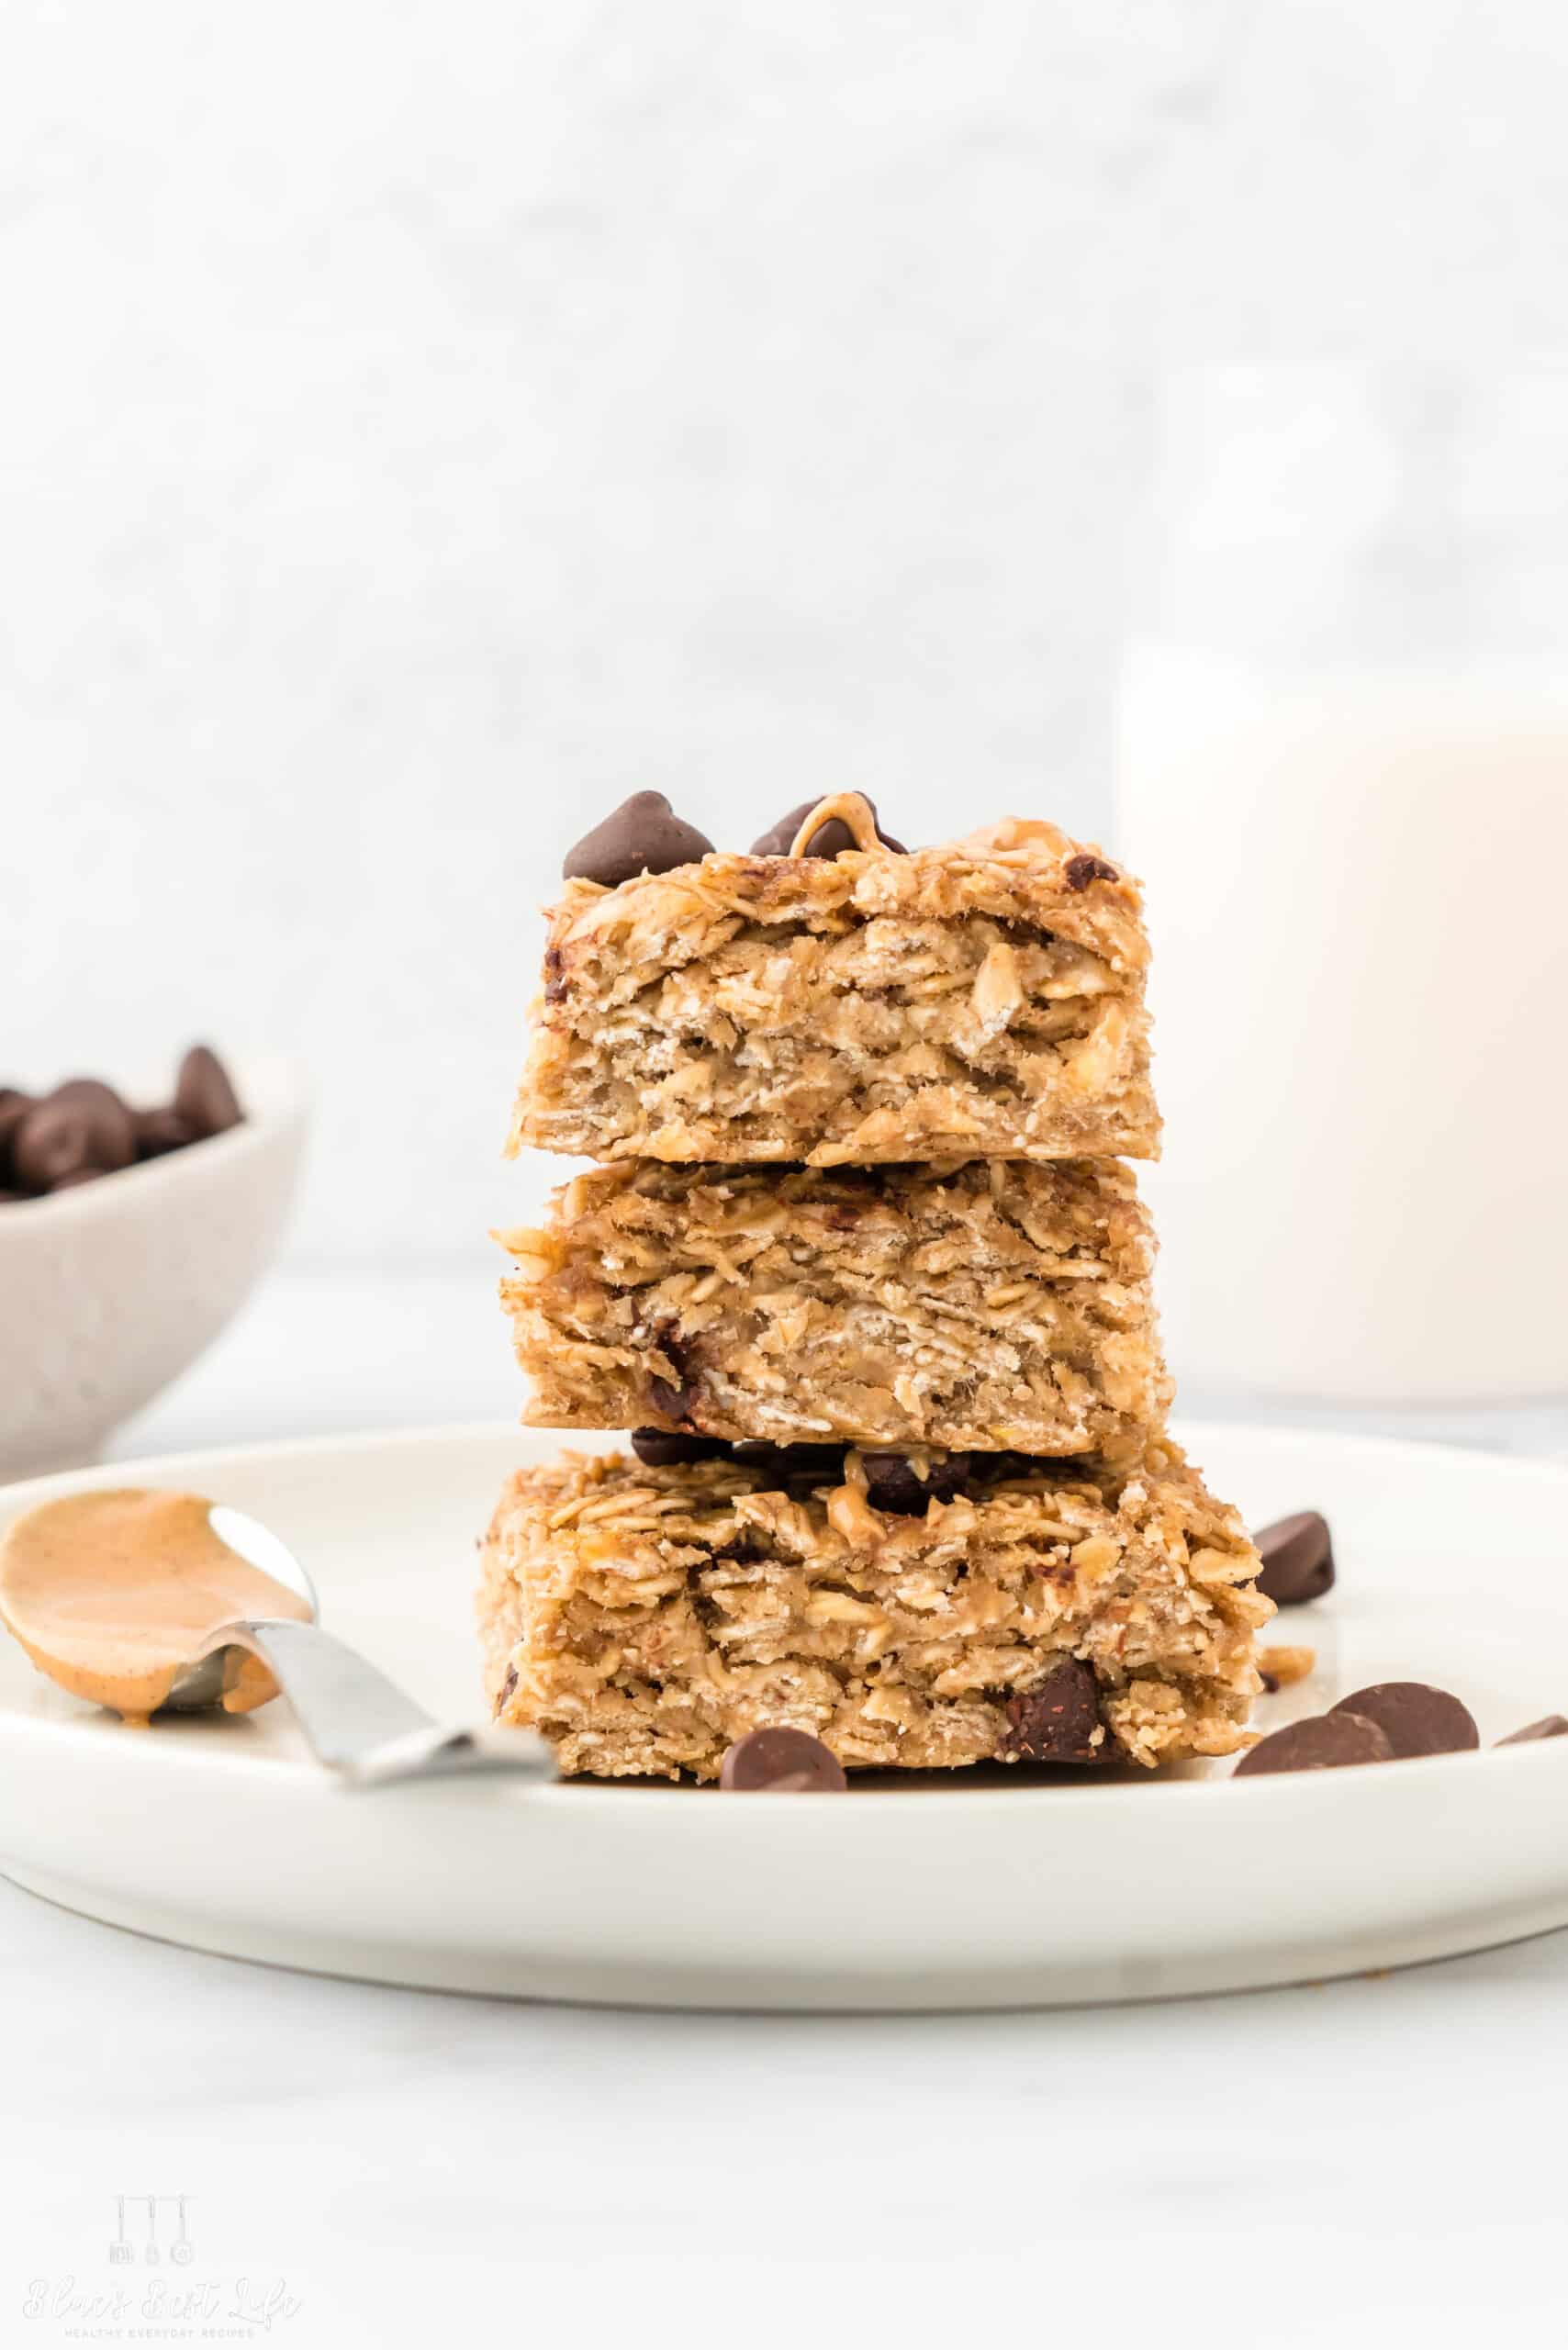 A stack of oatmeal bars on a plate.